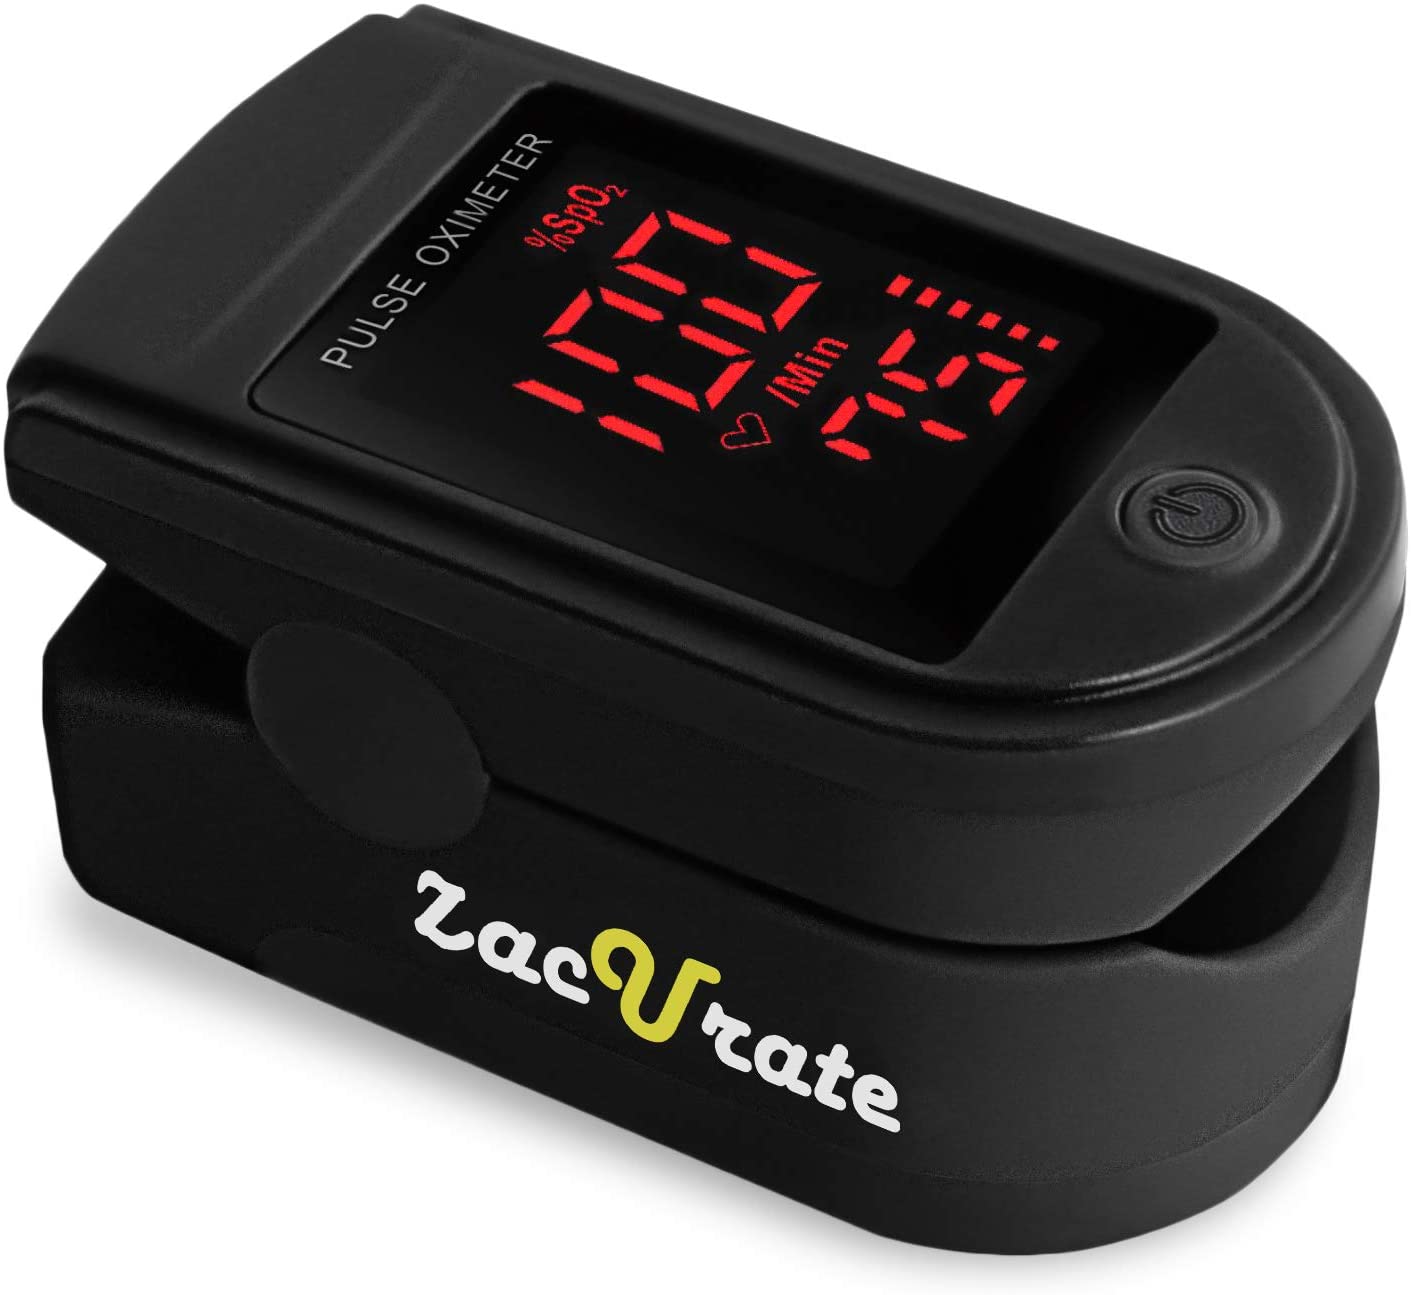 Zacurate-Pro-Series-500DL-Fingertip-Pulse-Oximeter - an image of an oximeter